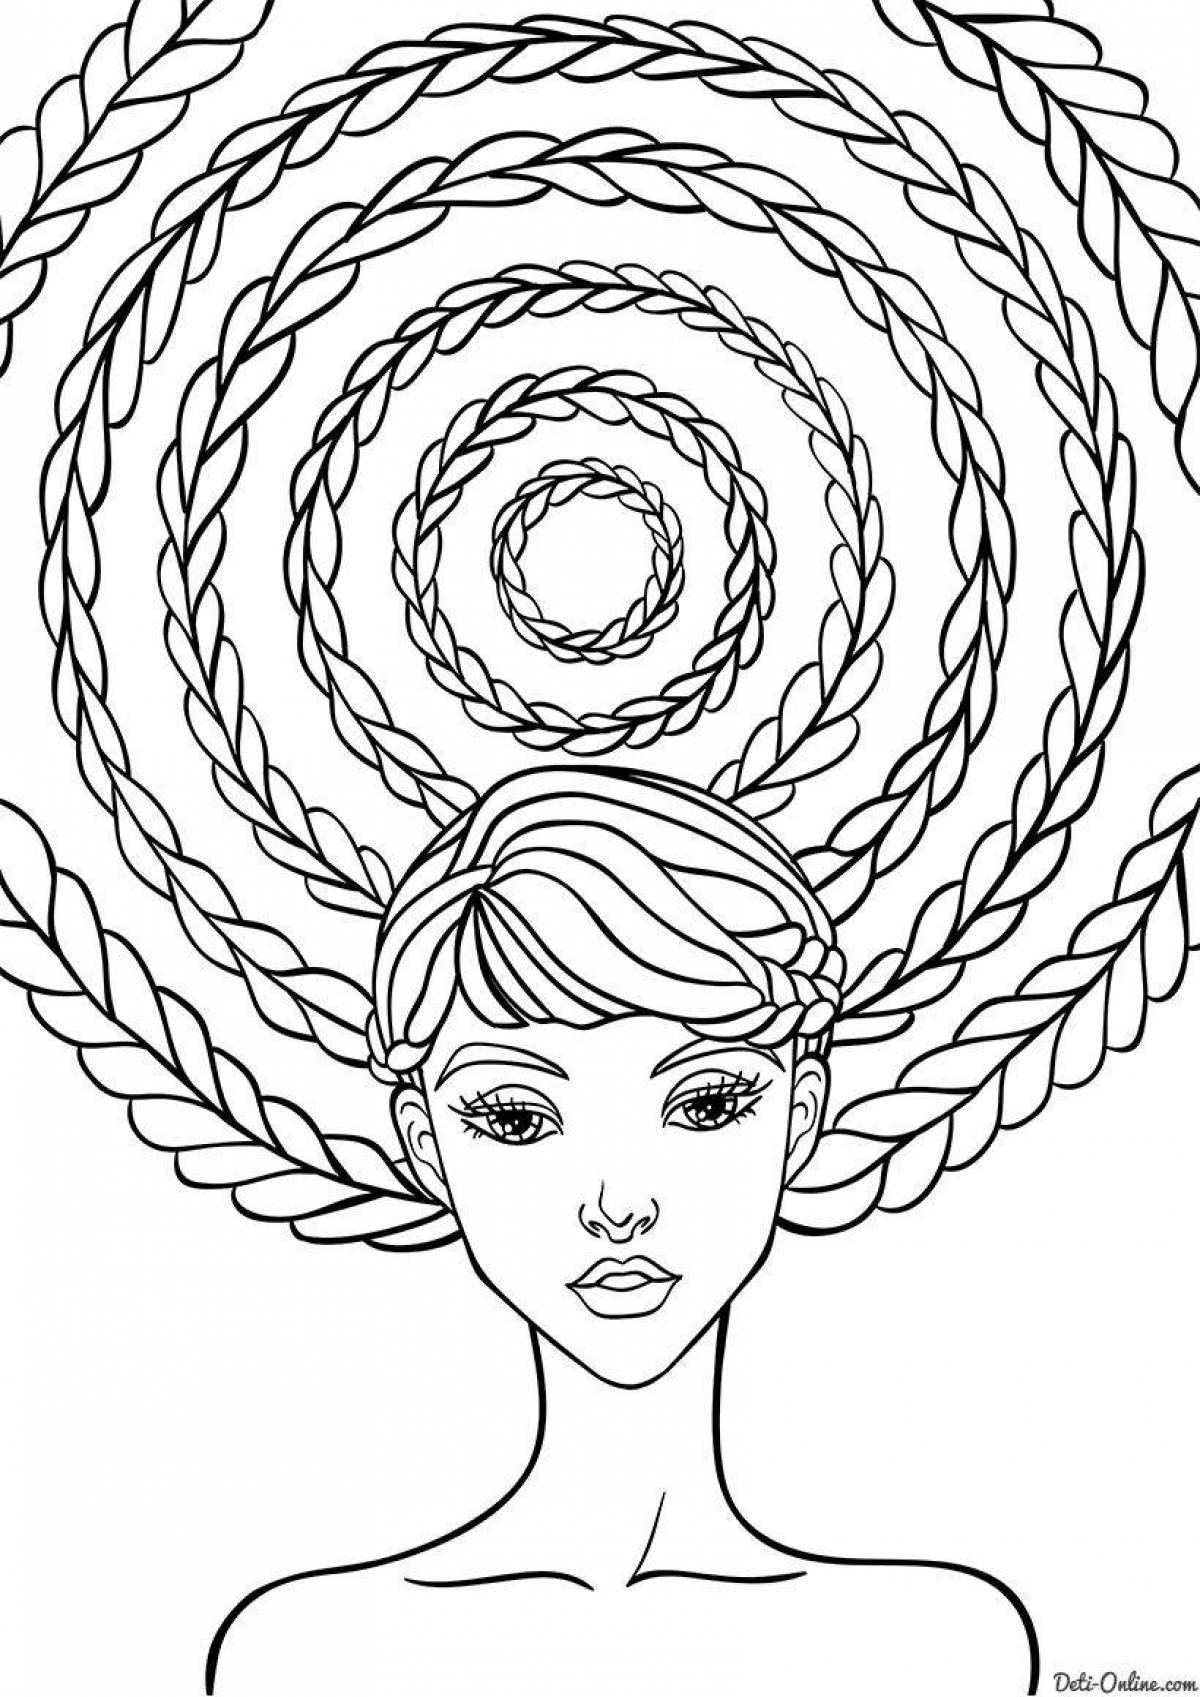 Smooth hair coloring page